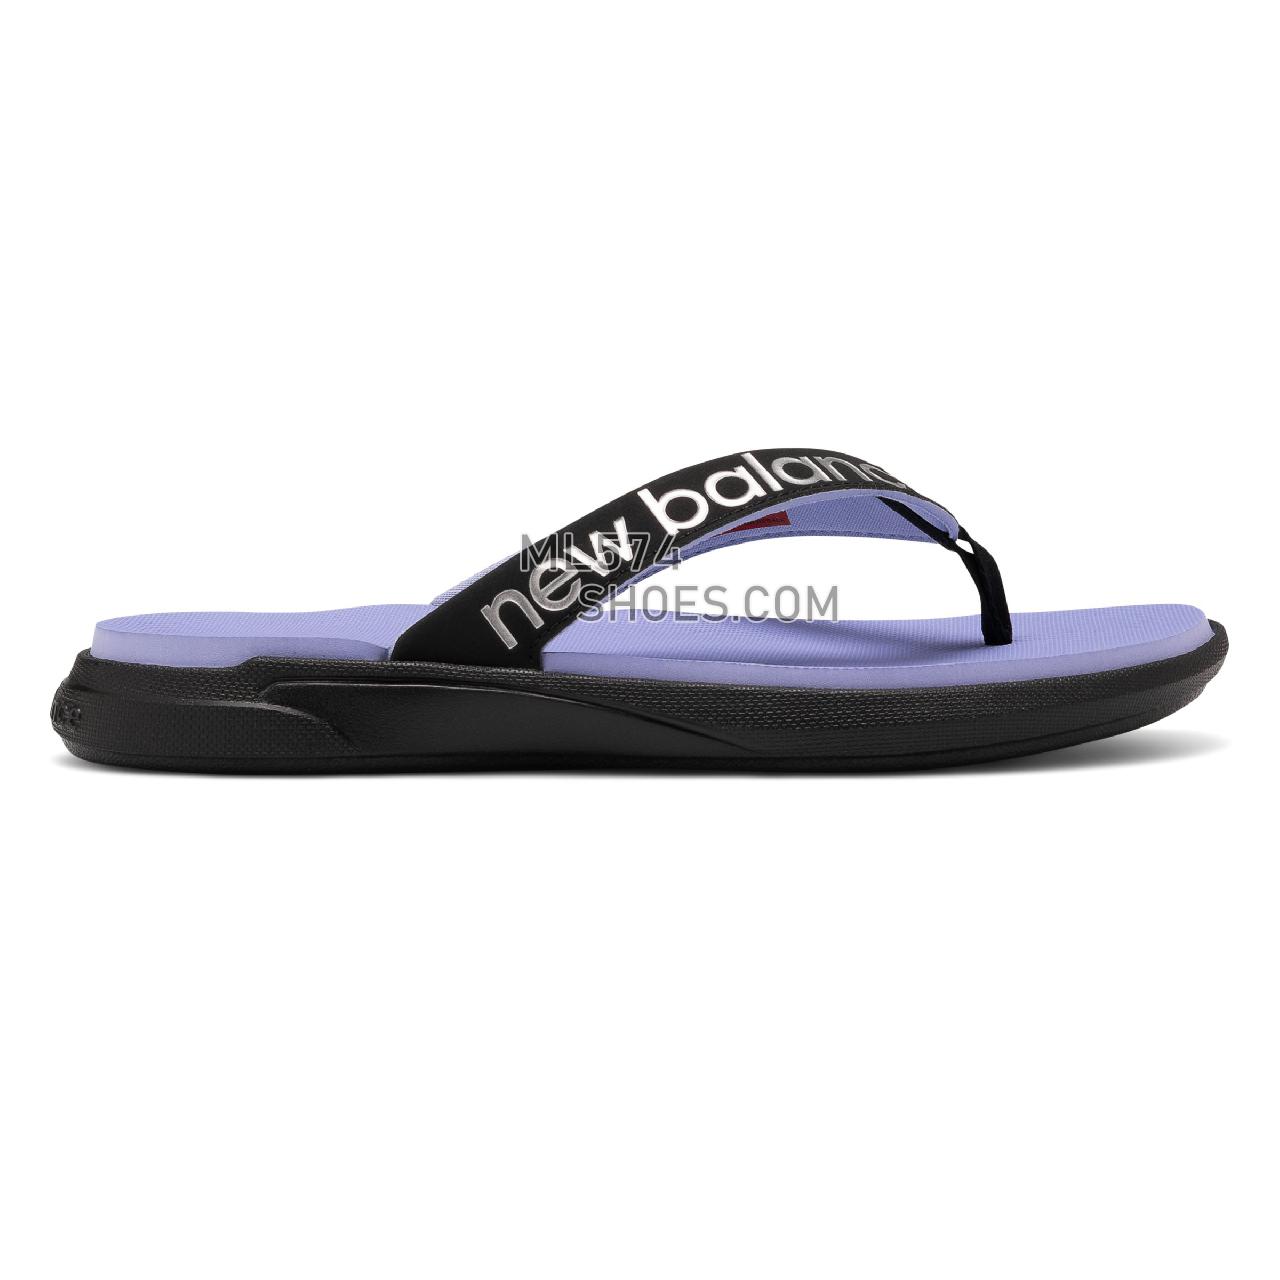 New Balance 340 - Women's Flip Flops - Black with Clear Amethyst and Silver Metallic - SWT340L1